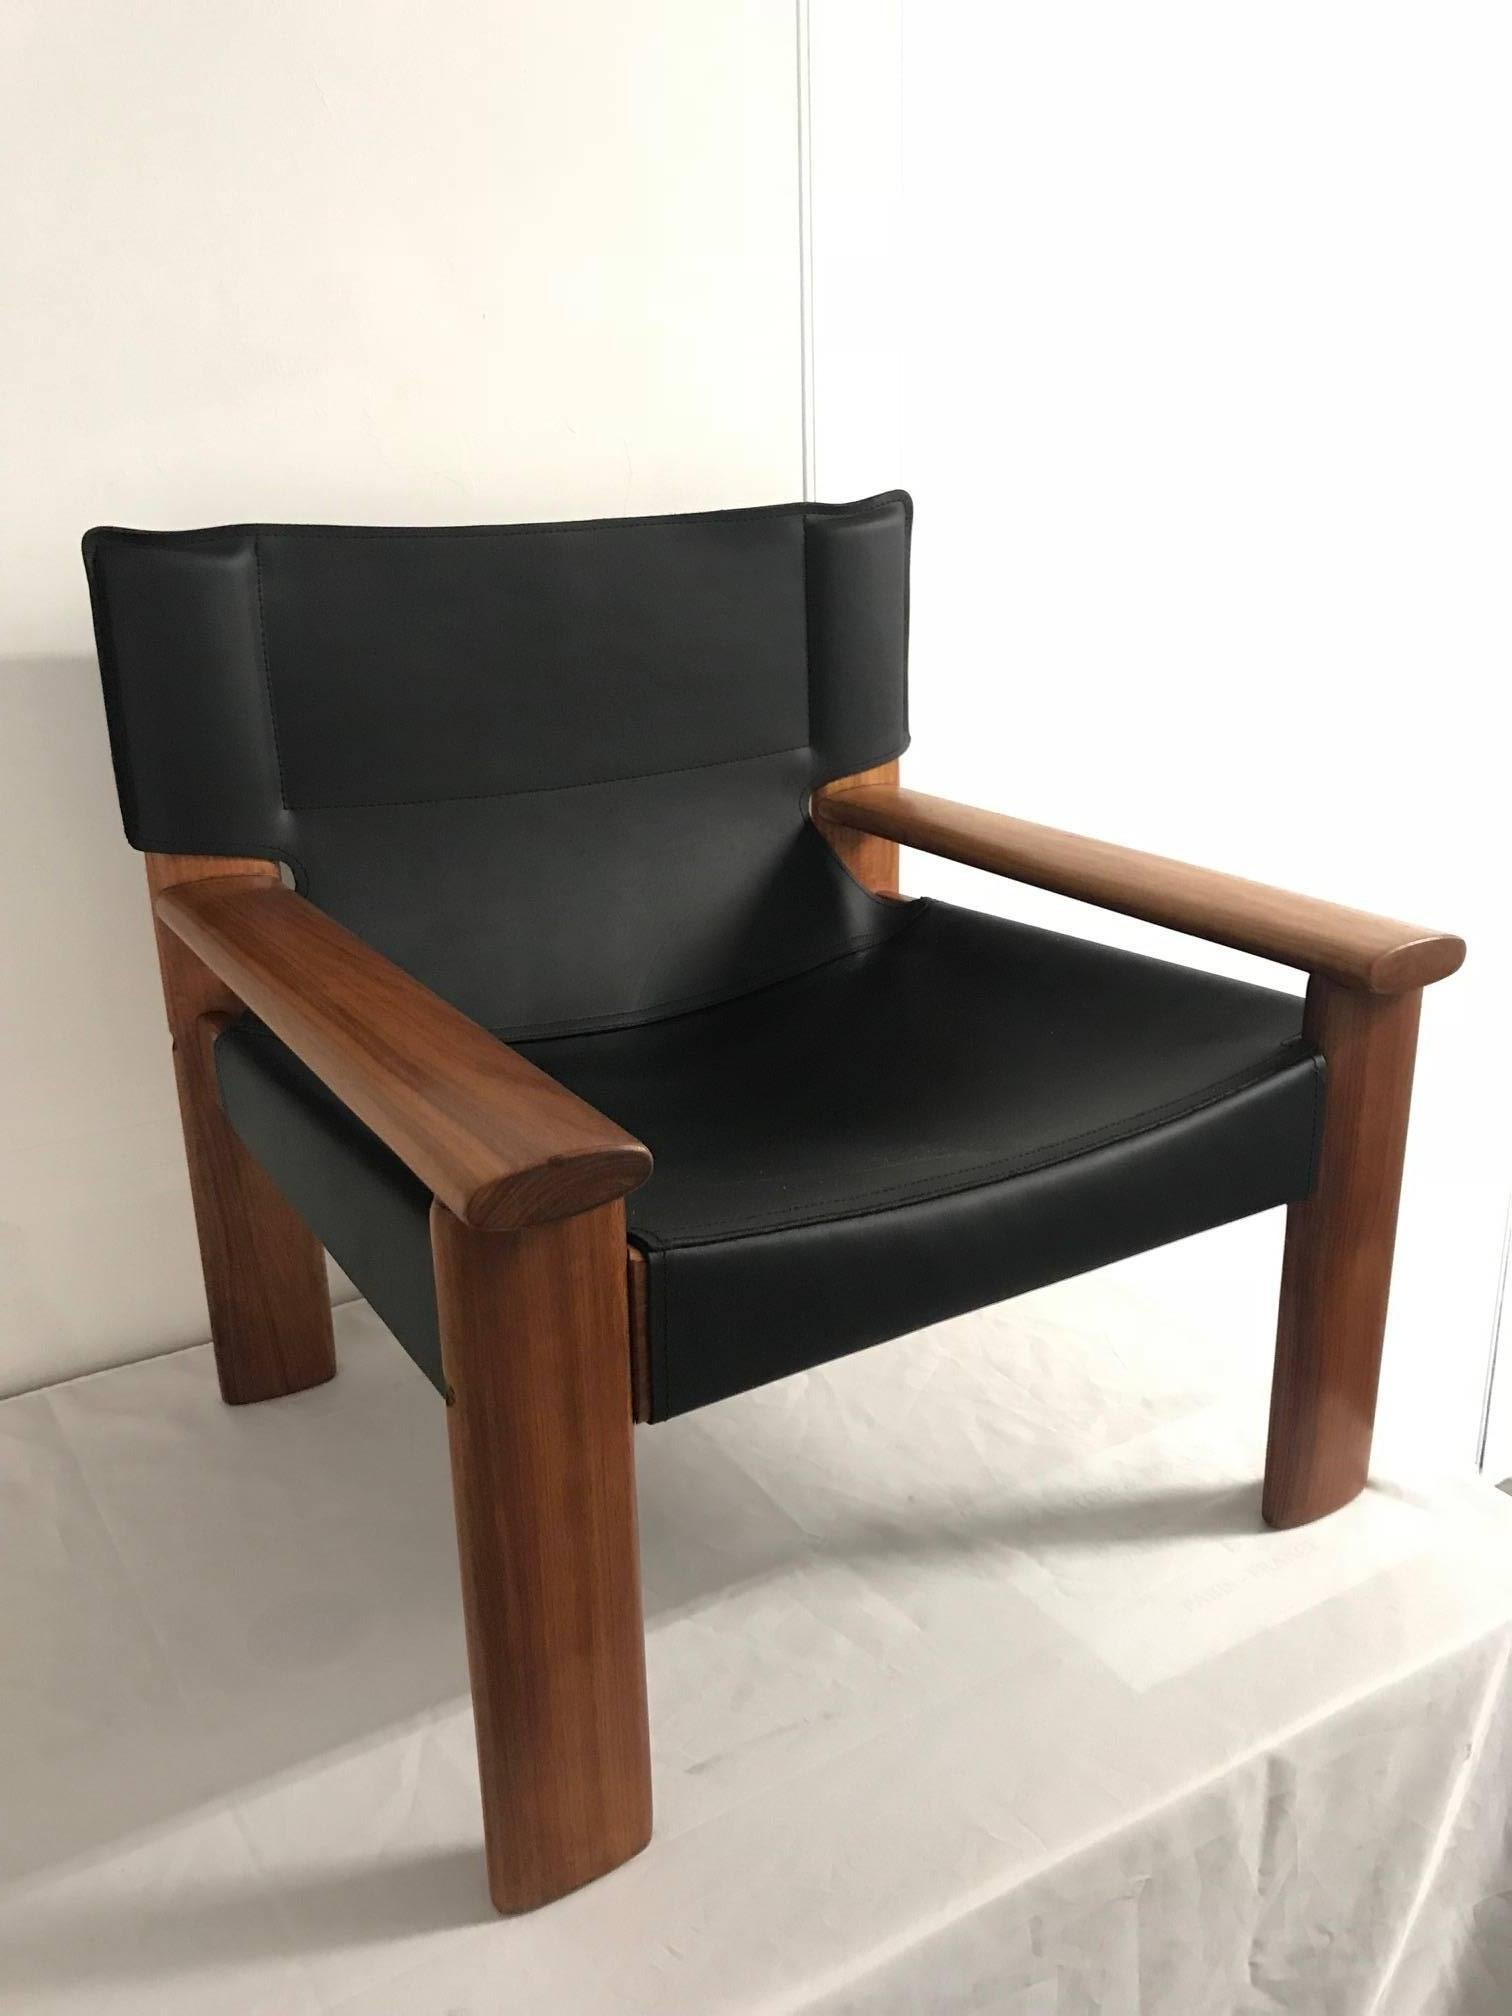 Pair of OCA armchairs, peroba di campo wood and leather.
OCA was a society created by Sergio Rodrigues in 1955 with a simple goal: create contemporary furniture in line with Bauhaus principles but within a Brazilian context.